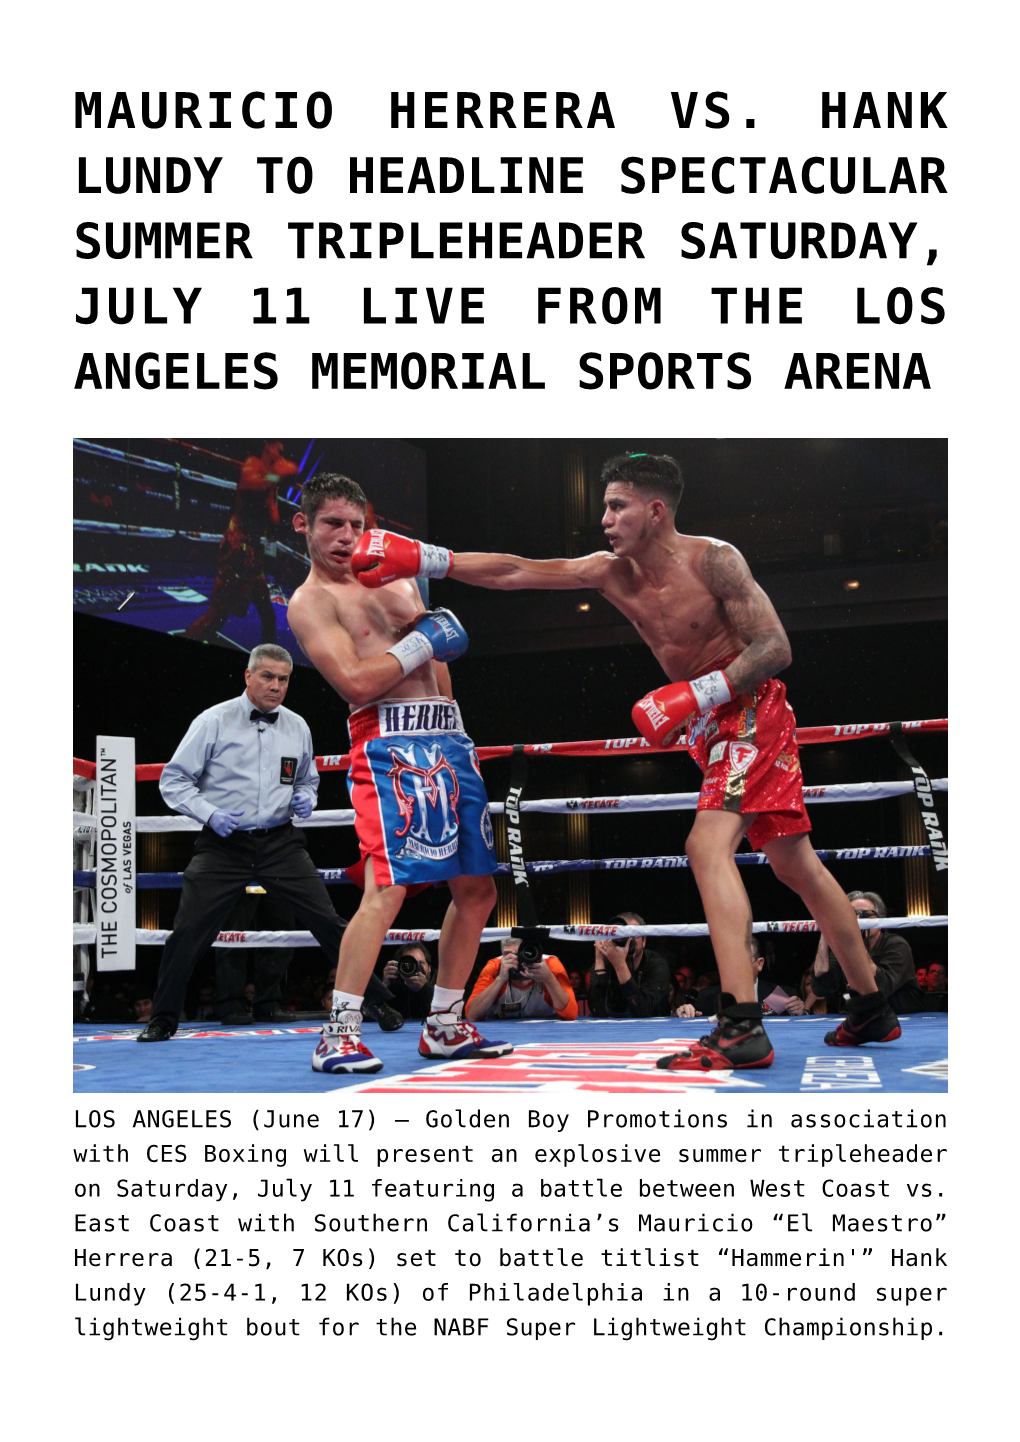 Mauricio Herrera Vs. Hank Lundy to Headline Spectacular Summer Tripleheader Saturday, July 11 Live from the Los Angeles Memorial Sports Arena